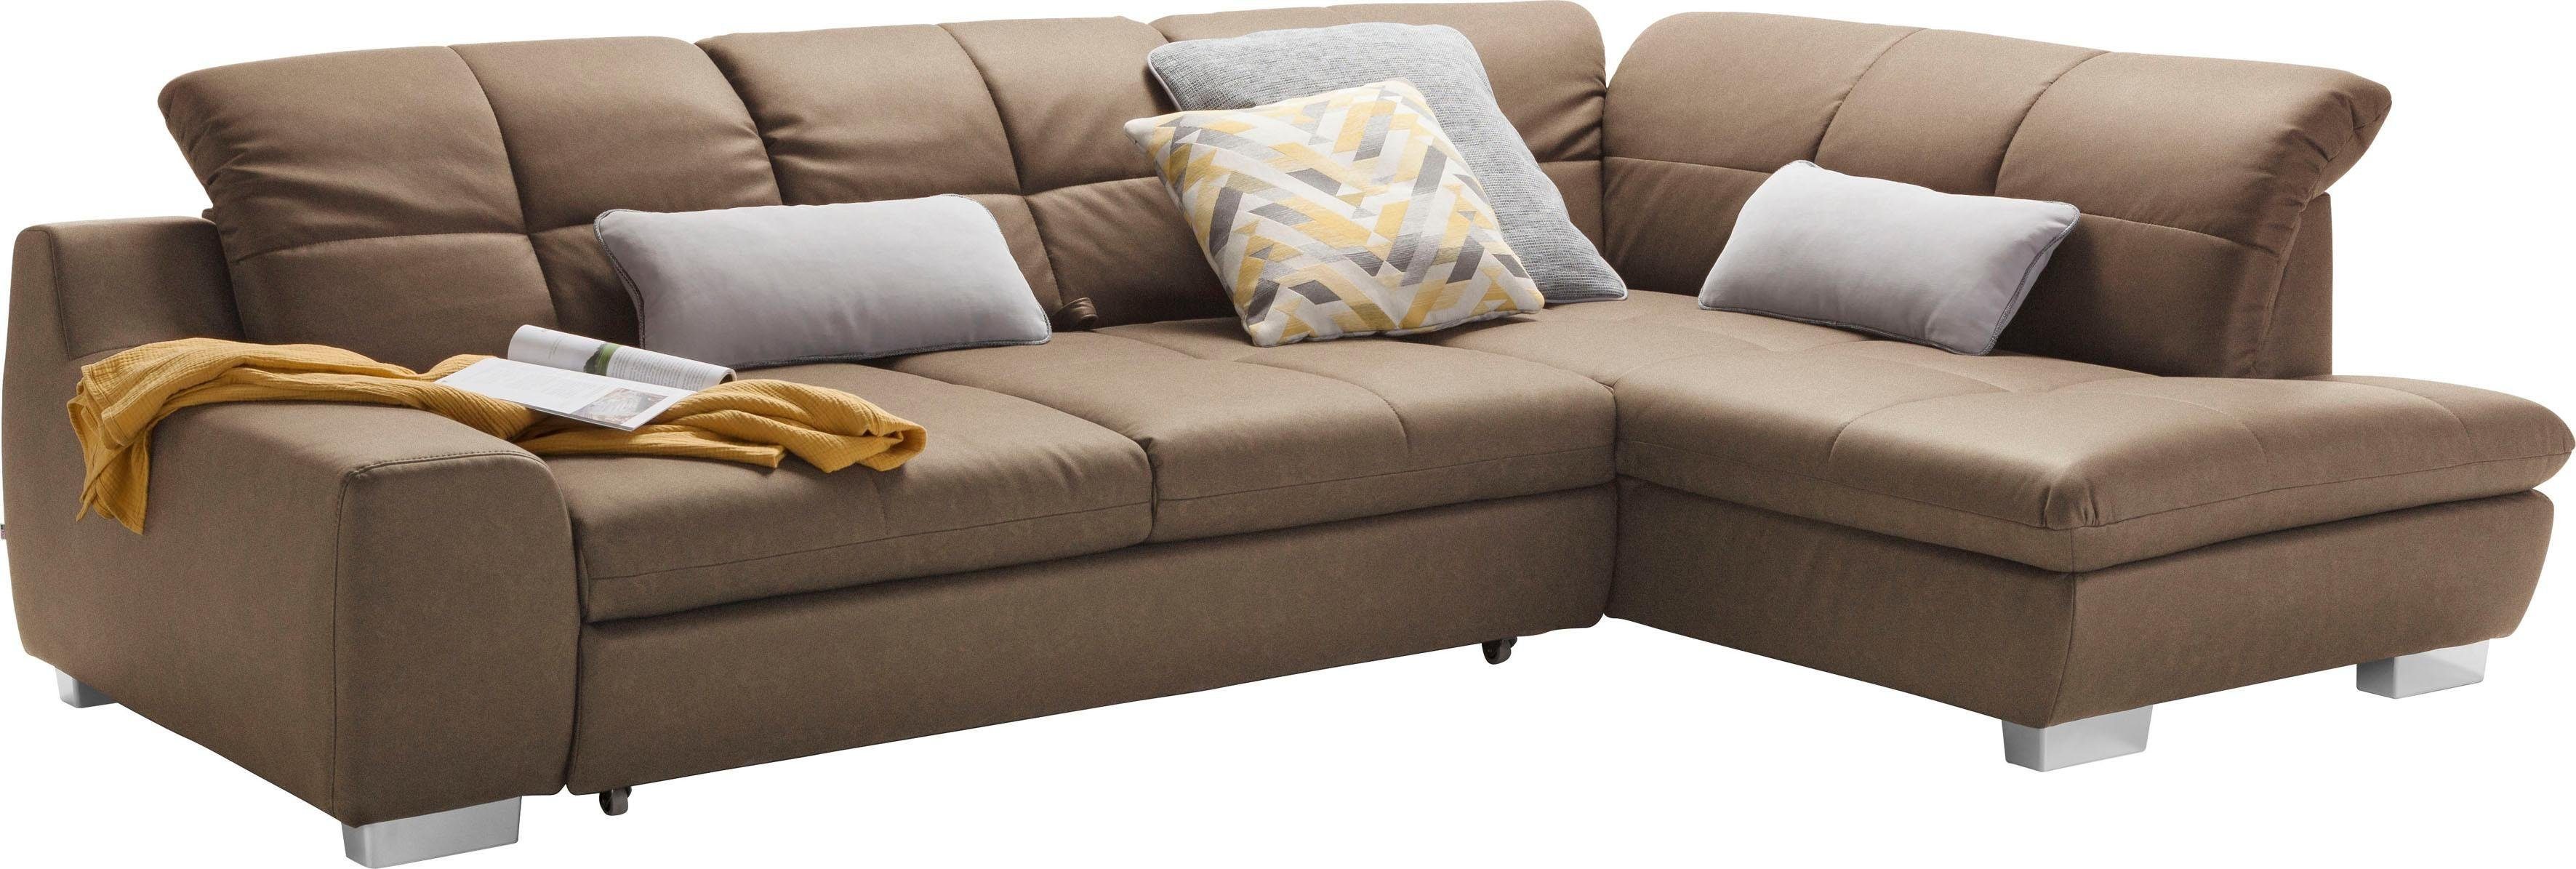 set one by Musterring Ecksofa SO 1200, wahlweise mit Bettfunktion